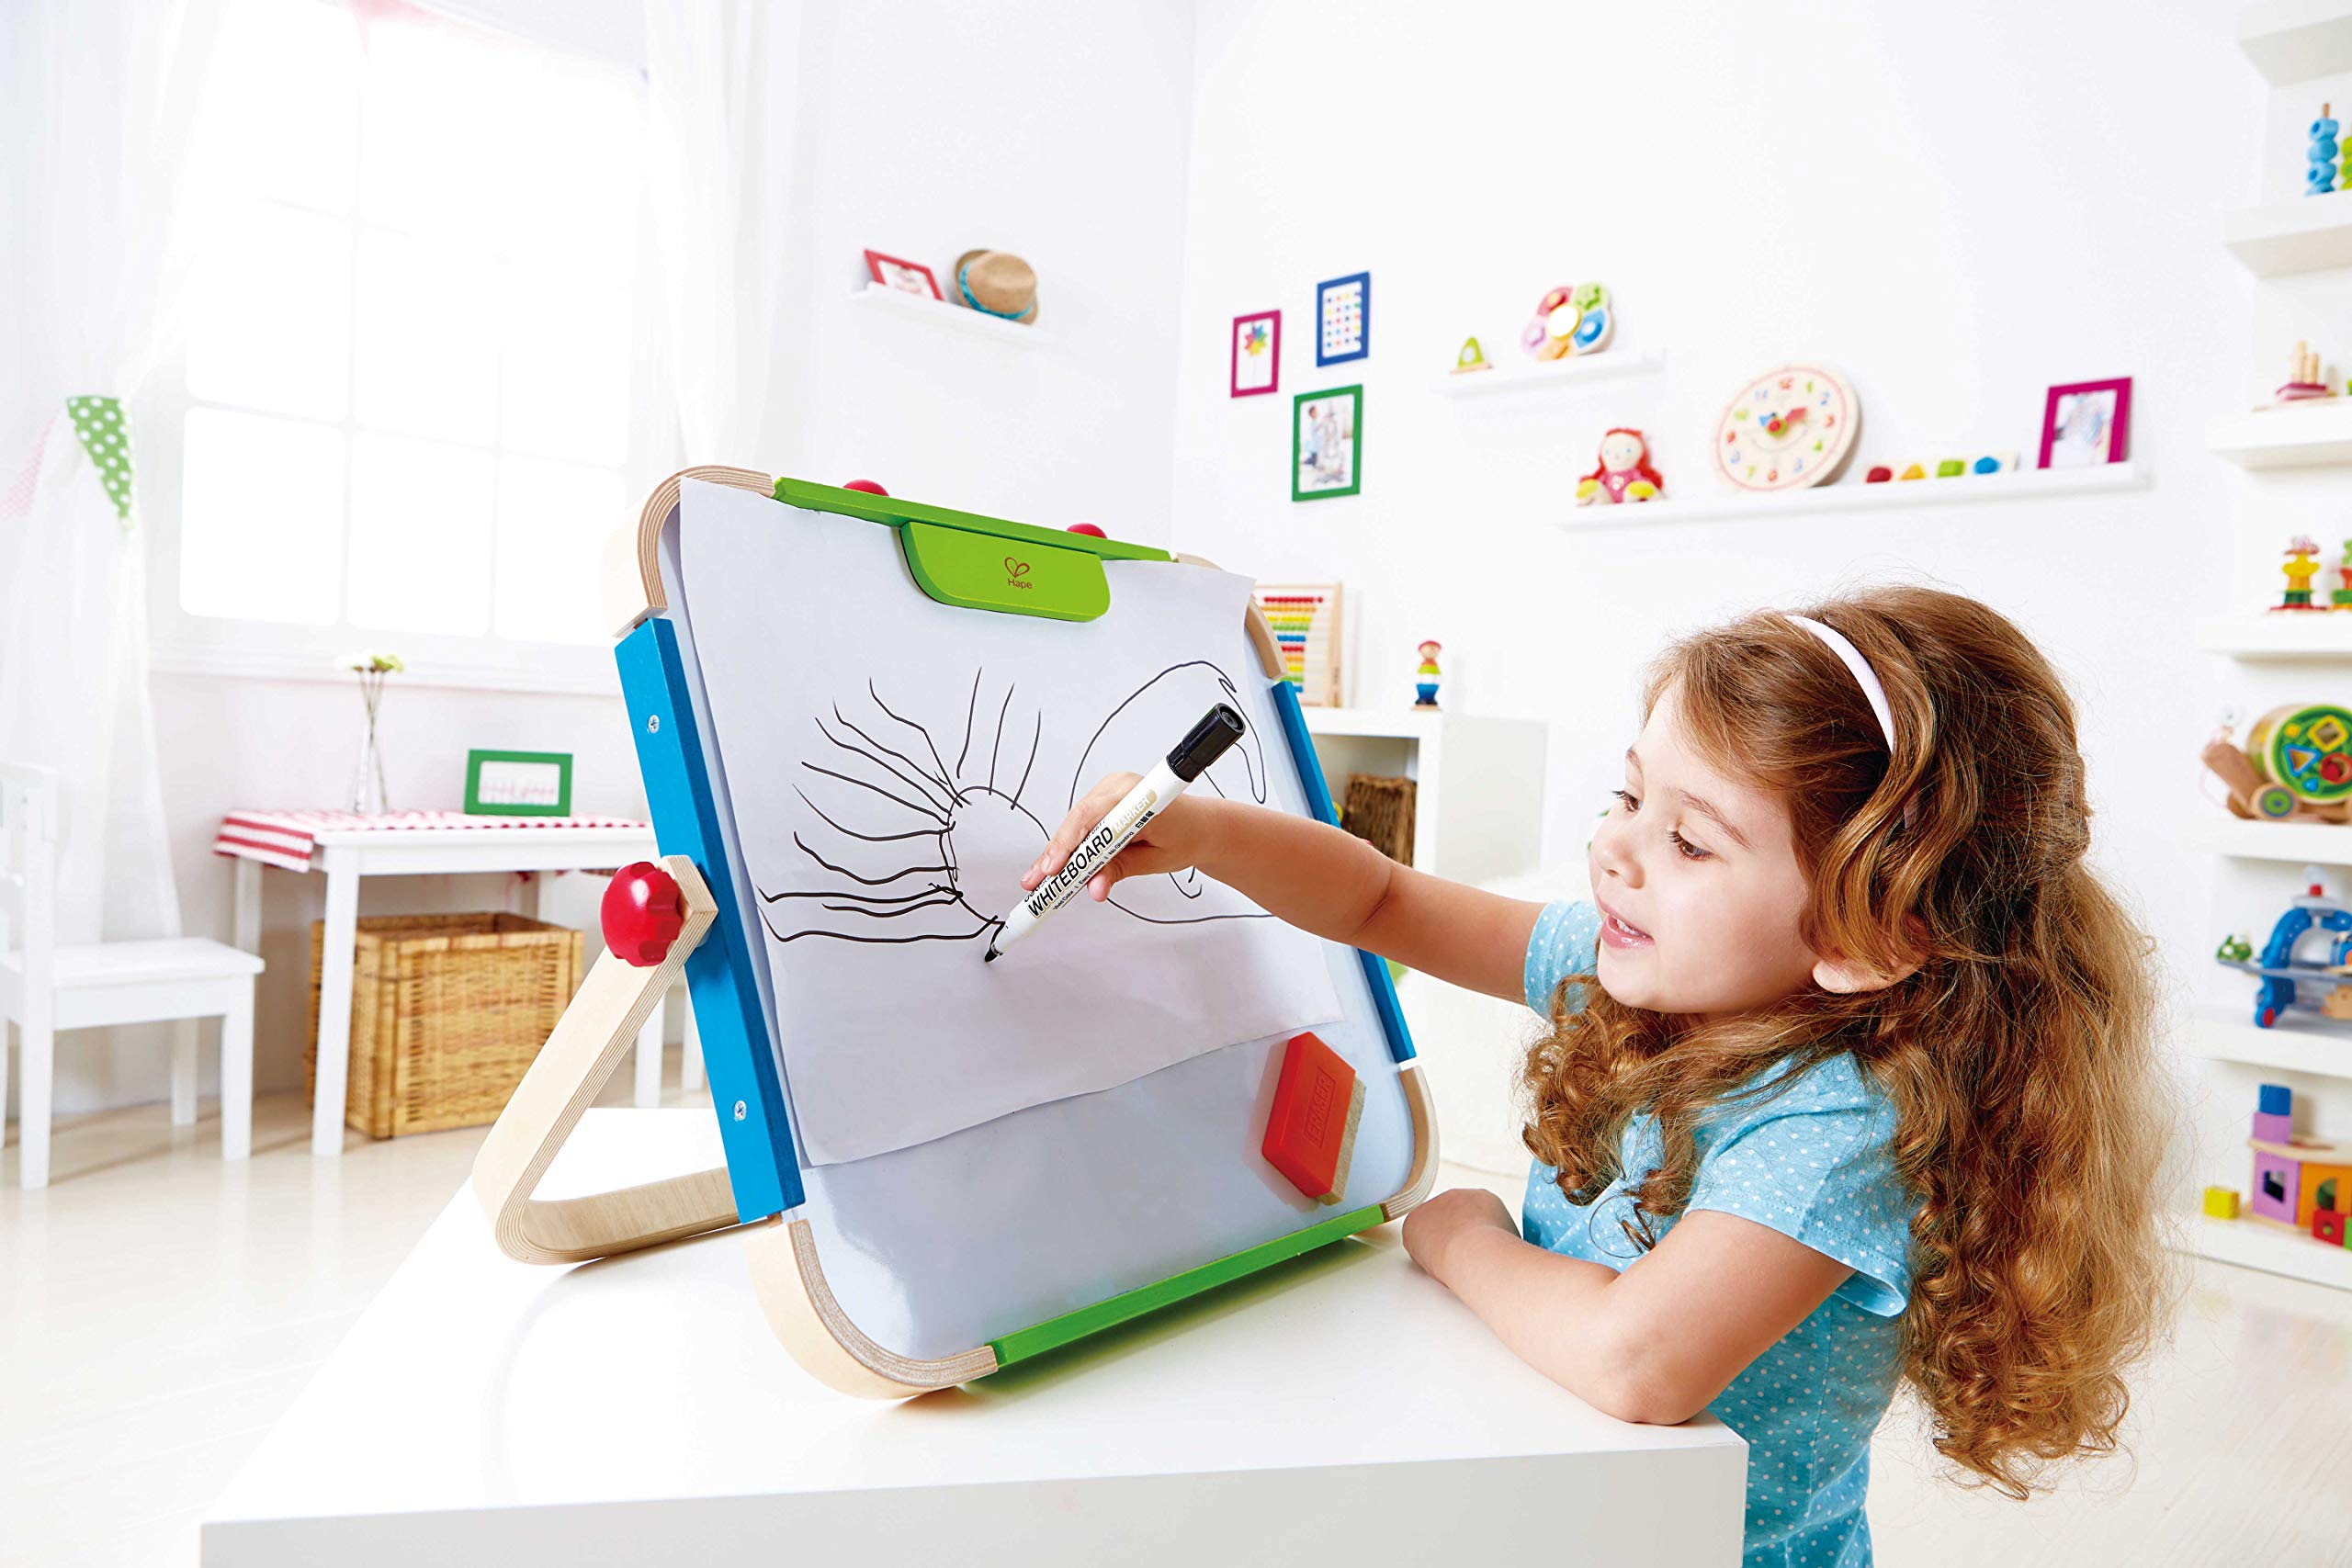 Early Explorer Anywhere Table Top Art Studio by Hape | Award Winning Double-Sided Wooden Kids Easel Whiteboard/Chalkboard with 2 Chalk Pieces, Eraser and Magnetic Wood Clamp for Paper